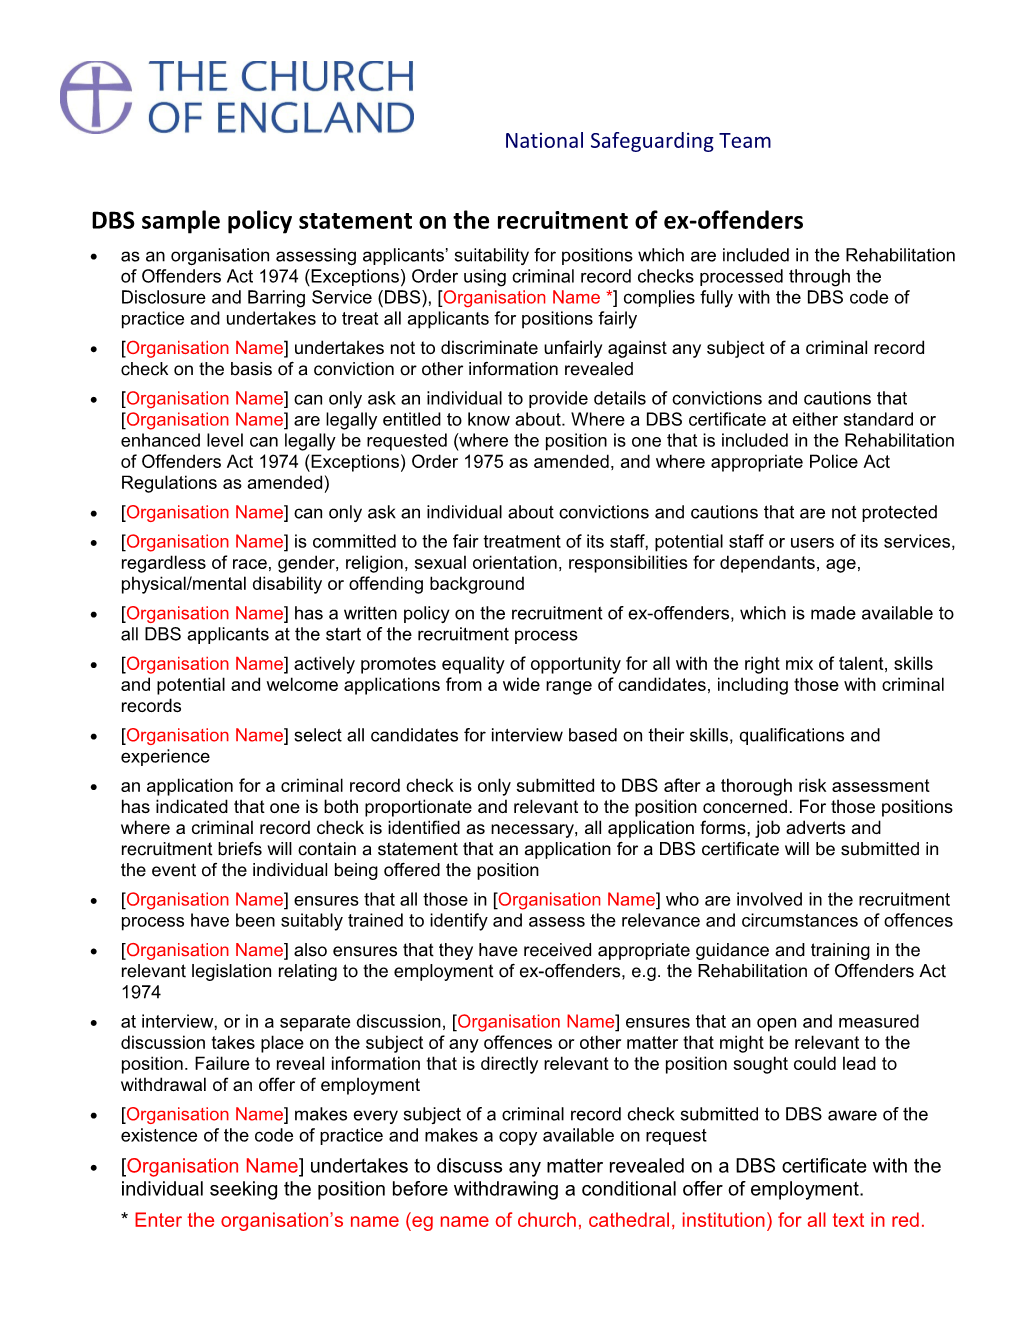 DBS Sample Policy Statement on the Recruitment of Ex-Offenders